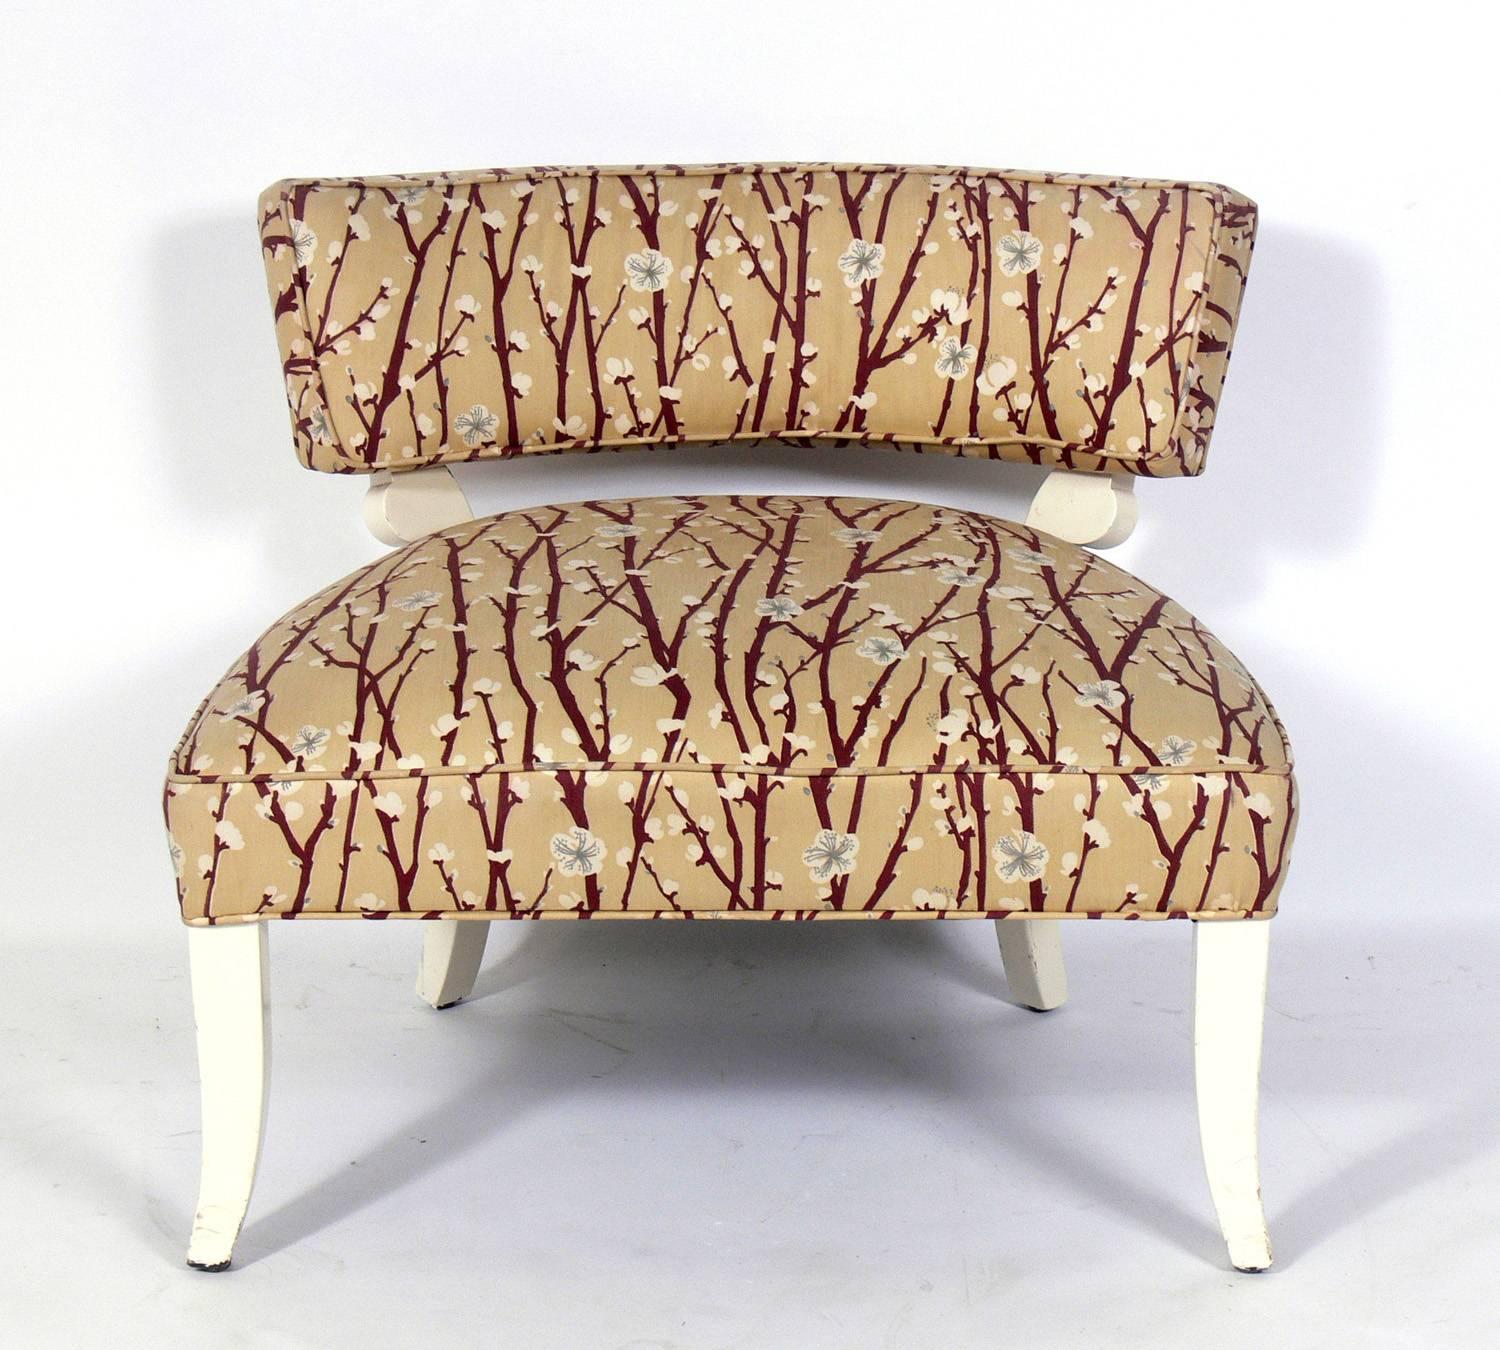 Pair of elegant slipper chairs in the manner of Billy Haines, American, circa 1940s. These chairs are currently being refinished and reupholstered and can be completed in your choice of finish color and in your fabric. The price noted below includes